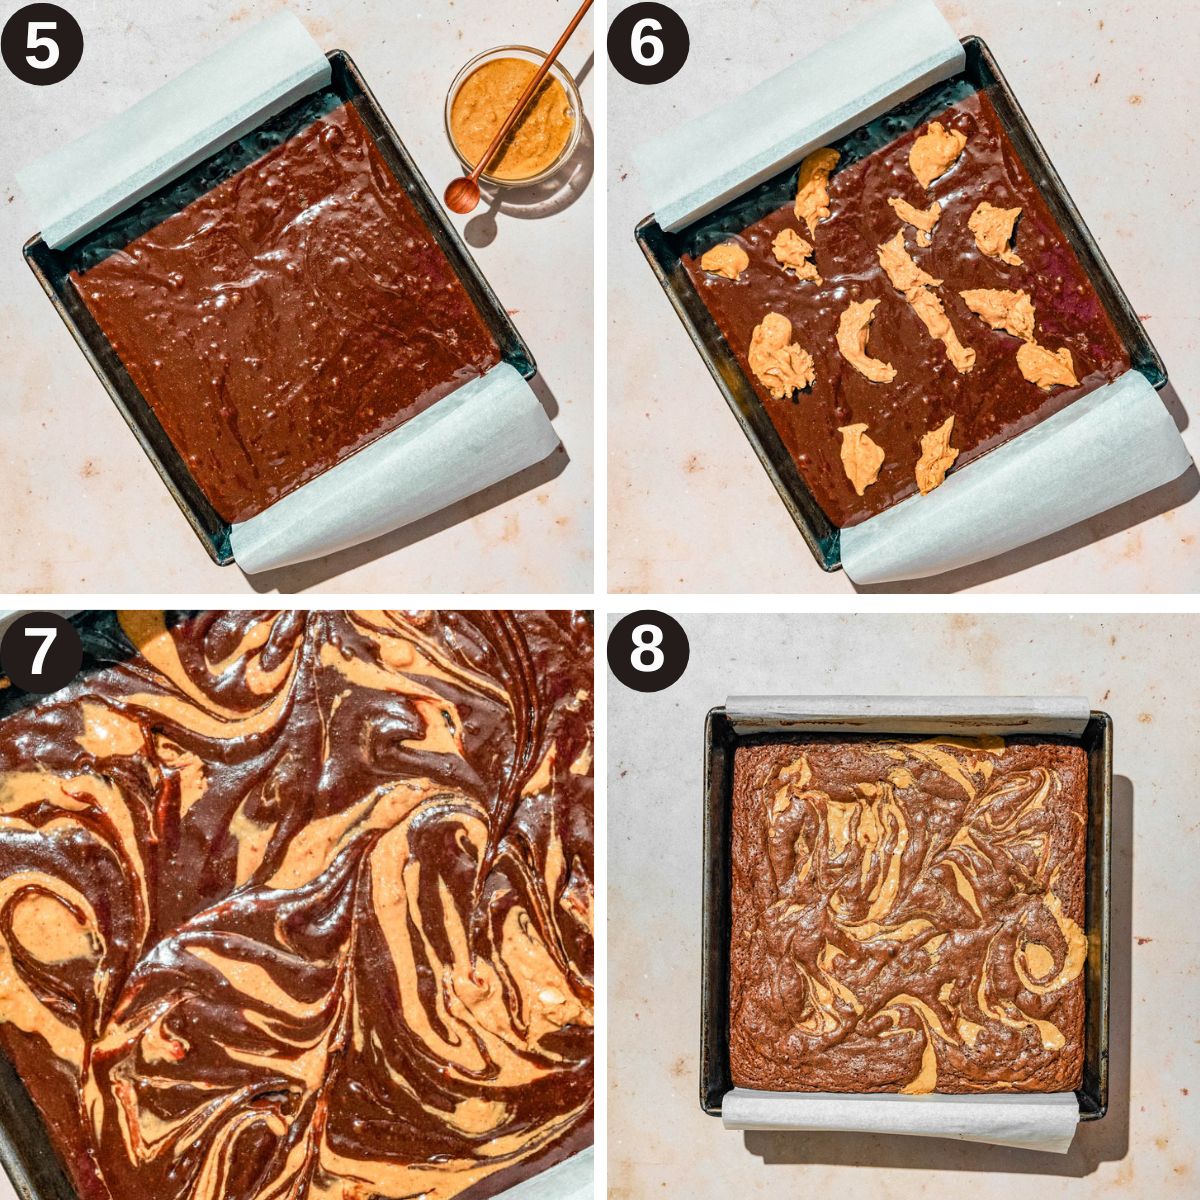 Brownies steps 5 to 8, adding peanut butter to the batter in pan and before baking.